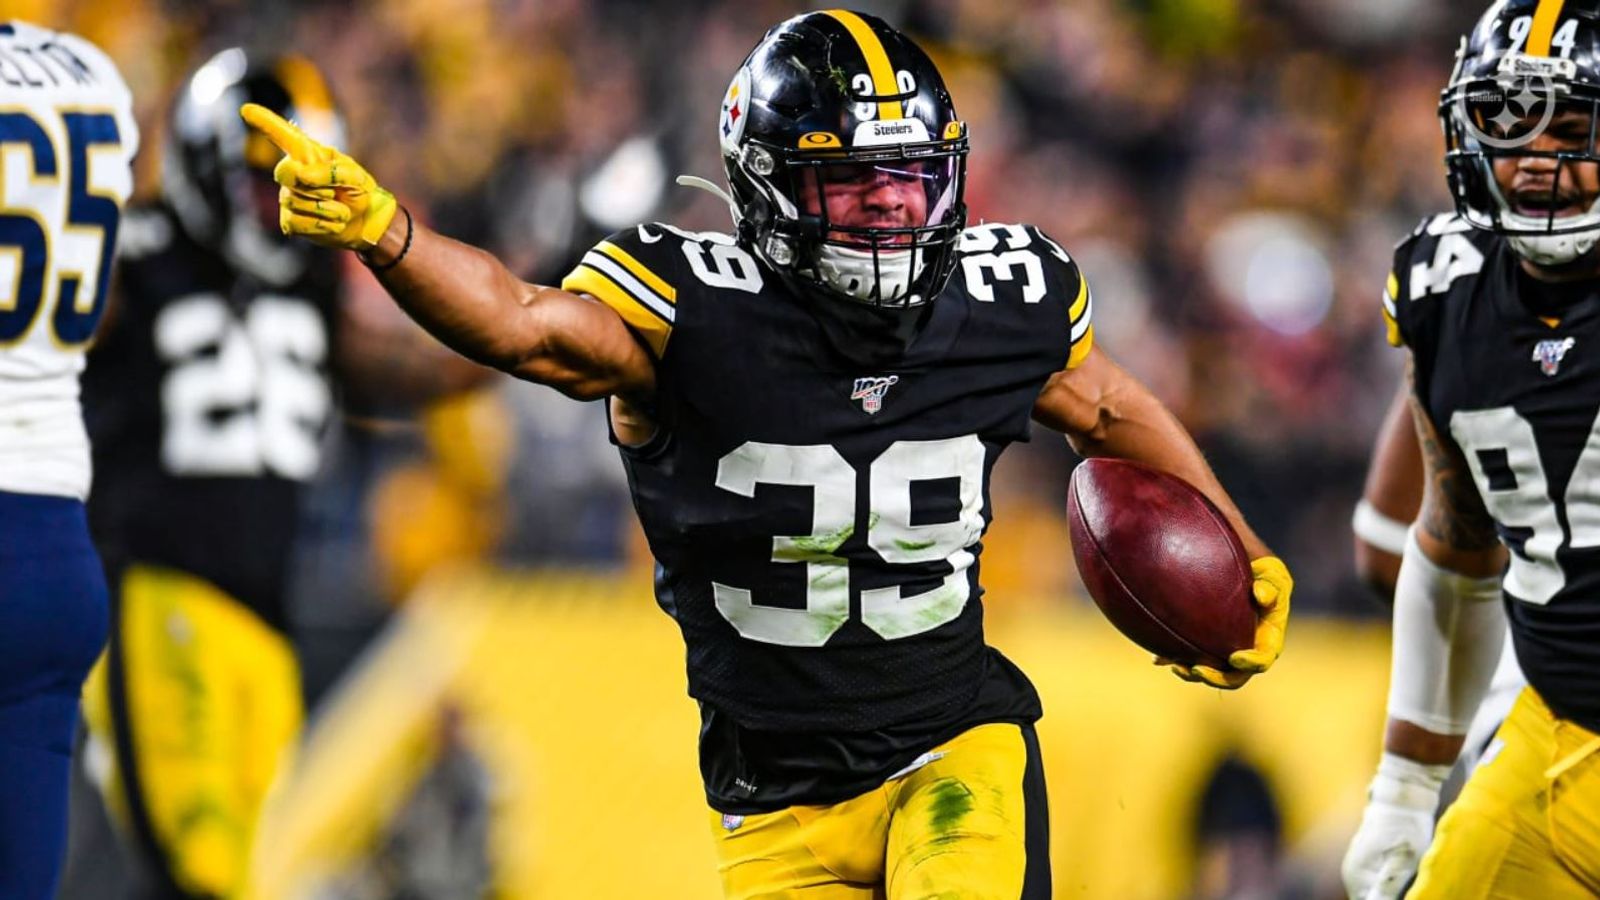 Minkah Fitzpatrick hoping to take the next step as a Steelers